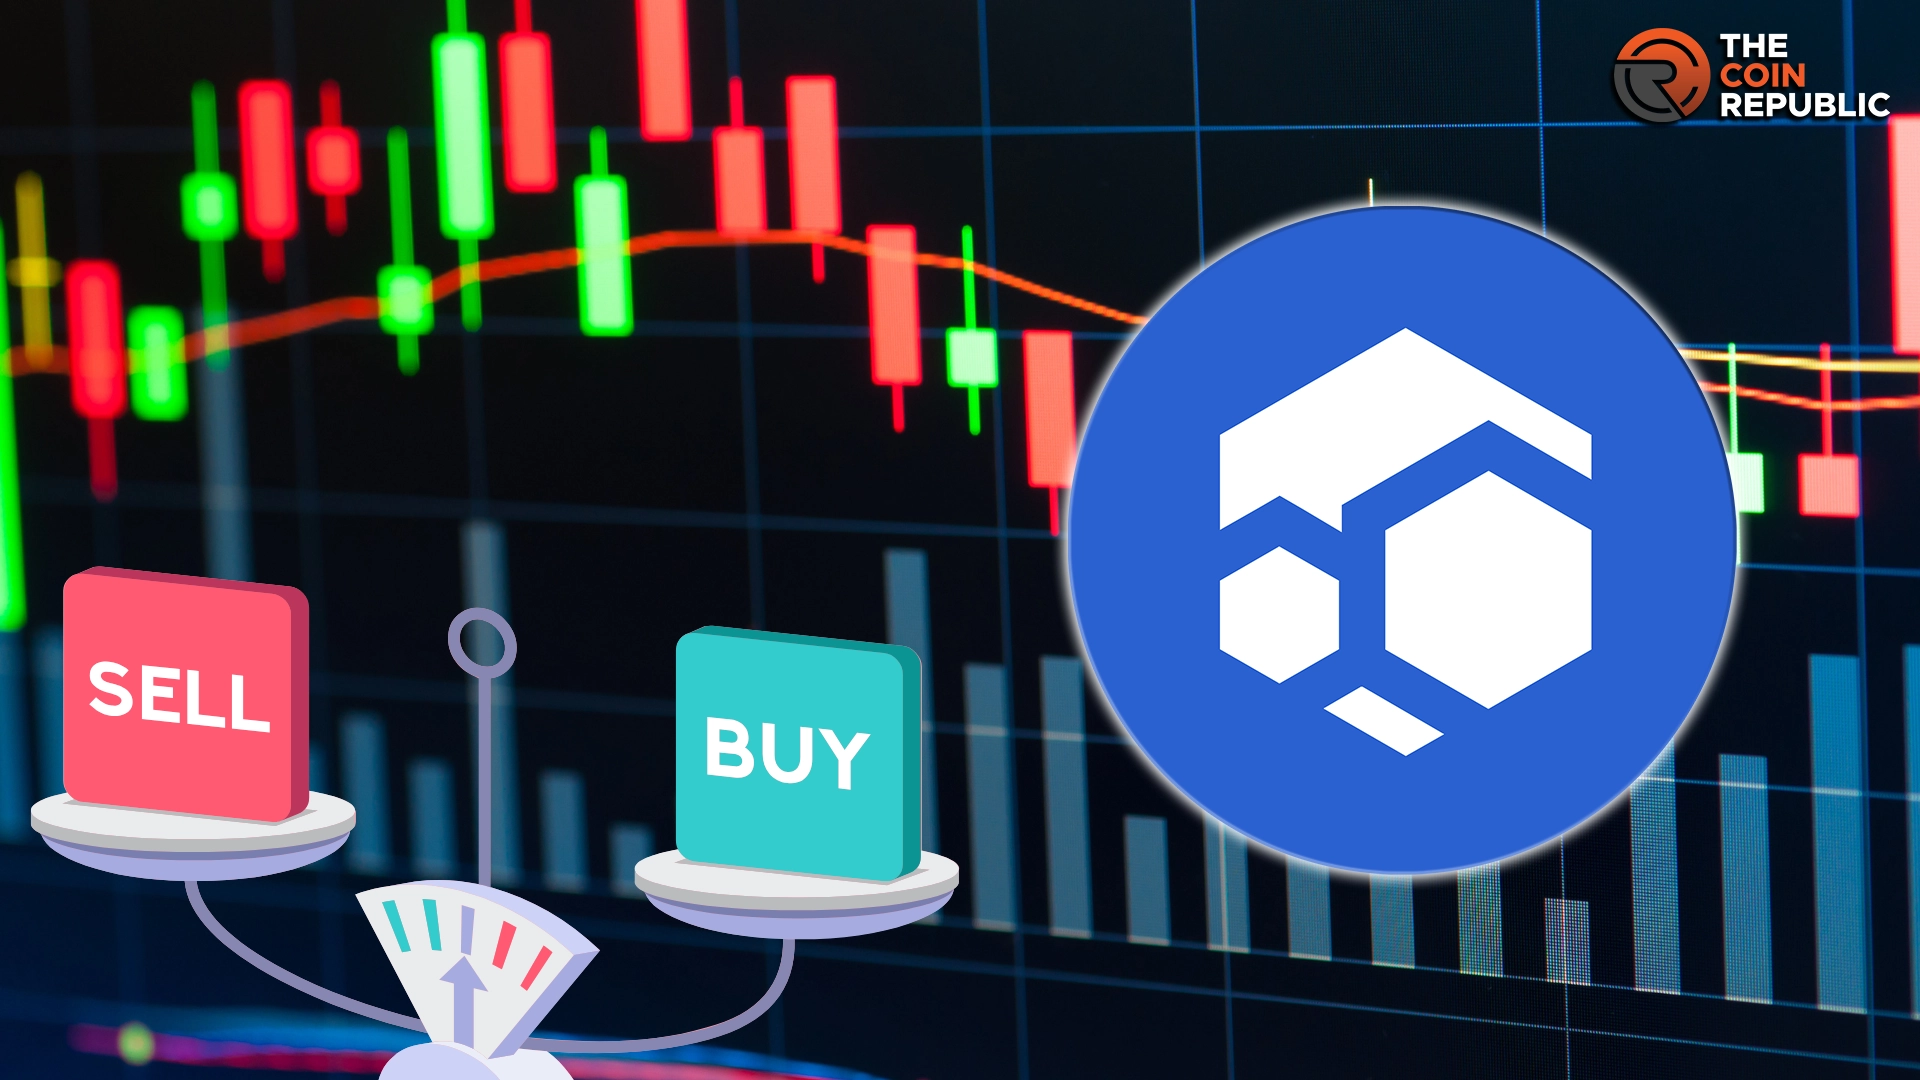 FLUX Crypto Shows Distribution: Can Buyers Retain $1 Mark?